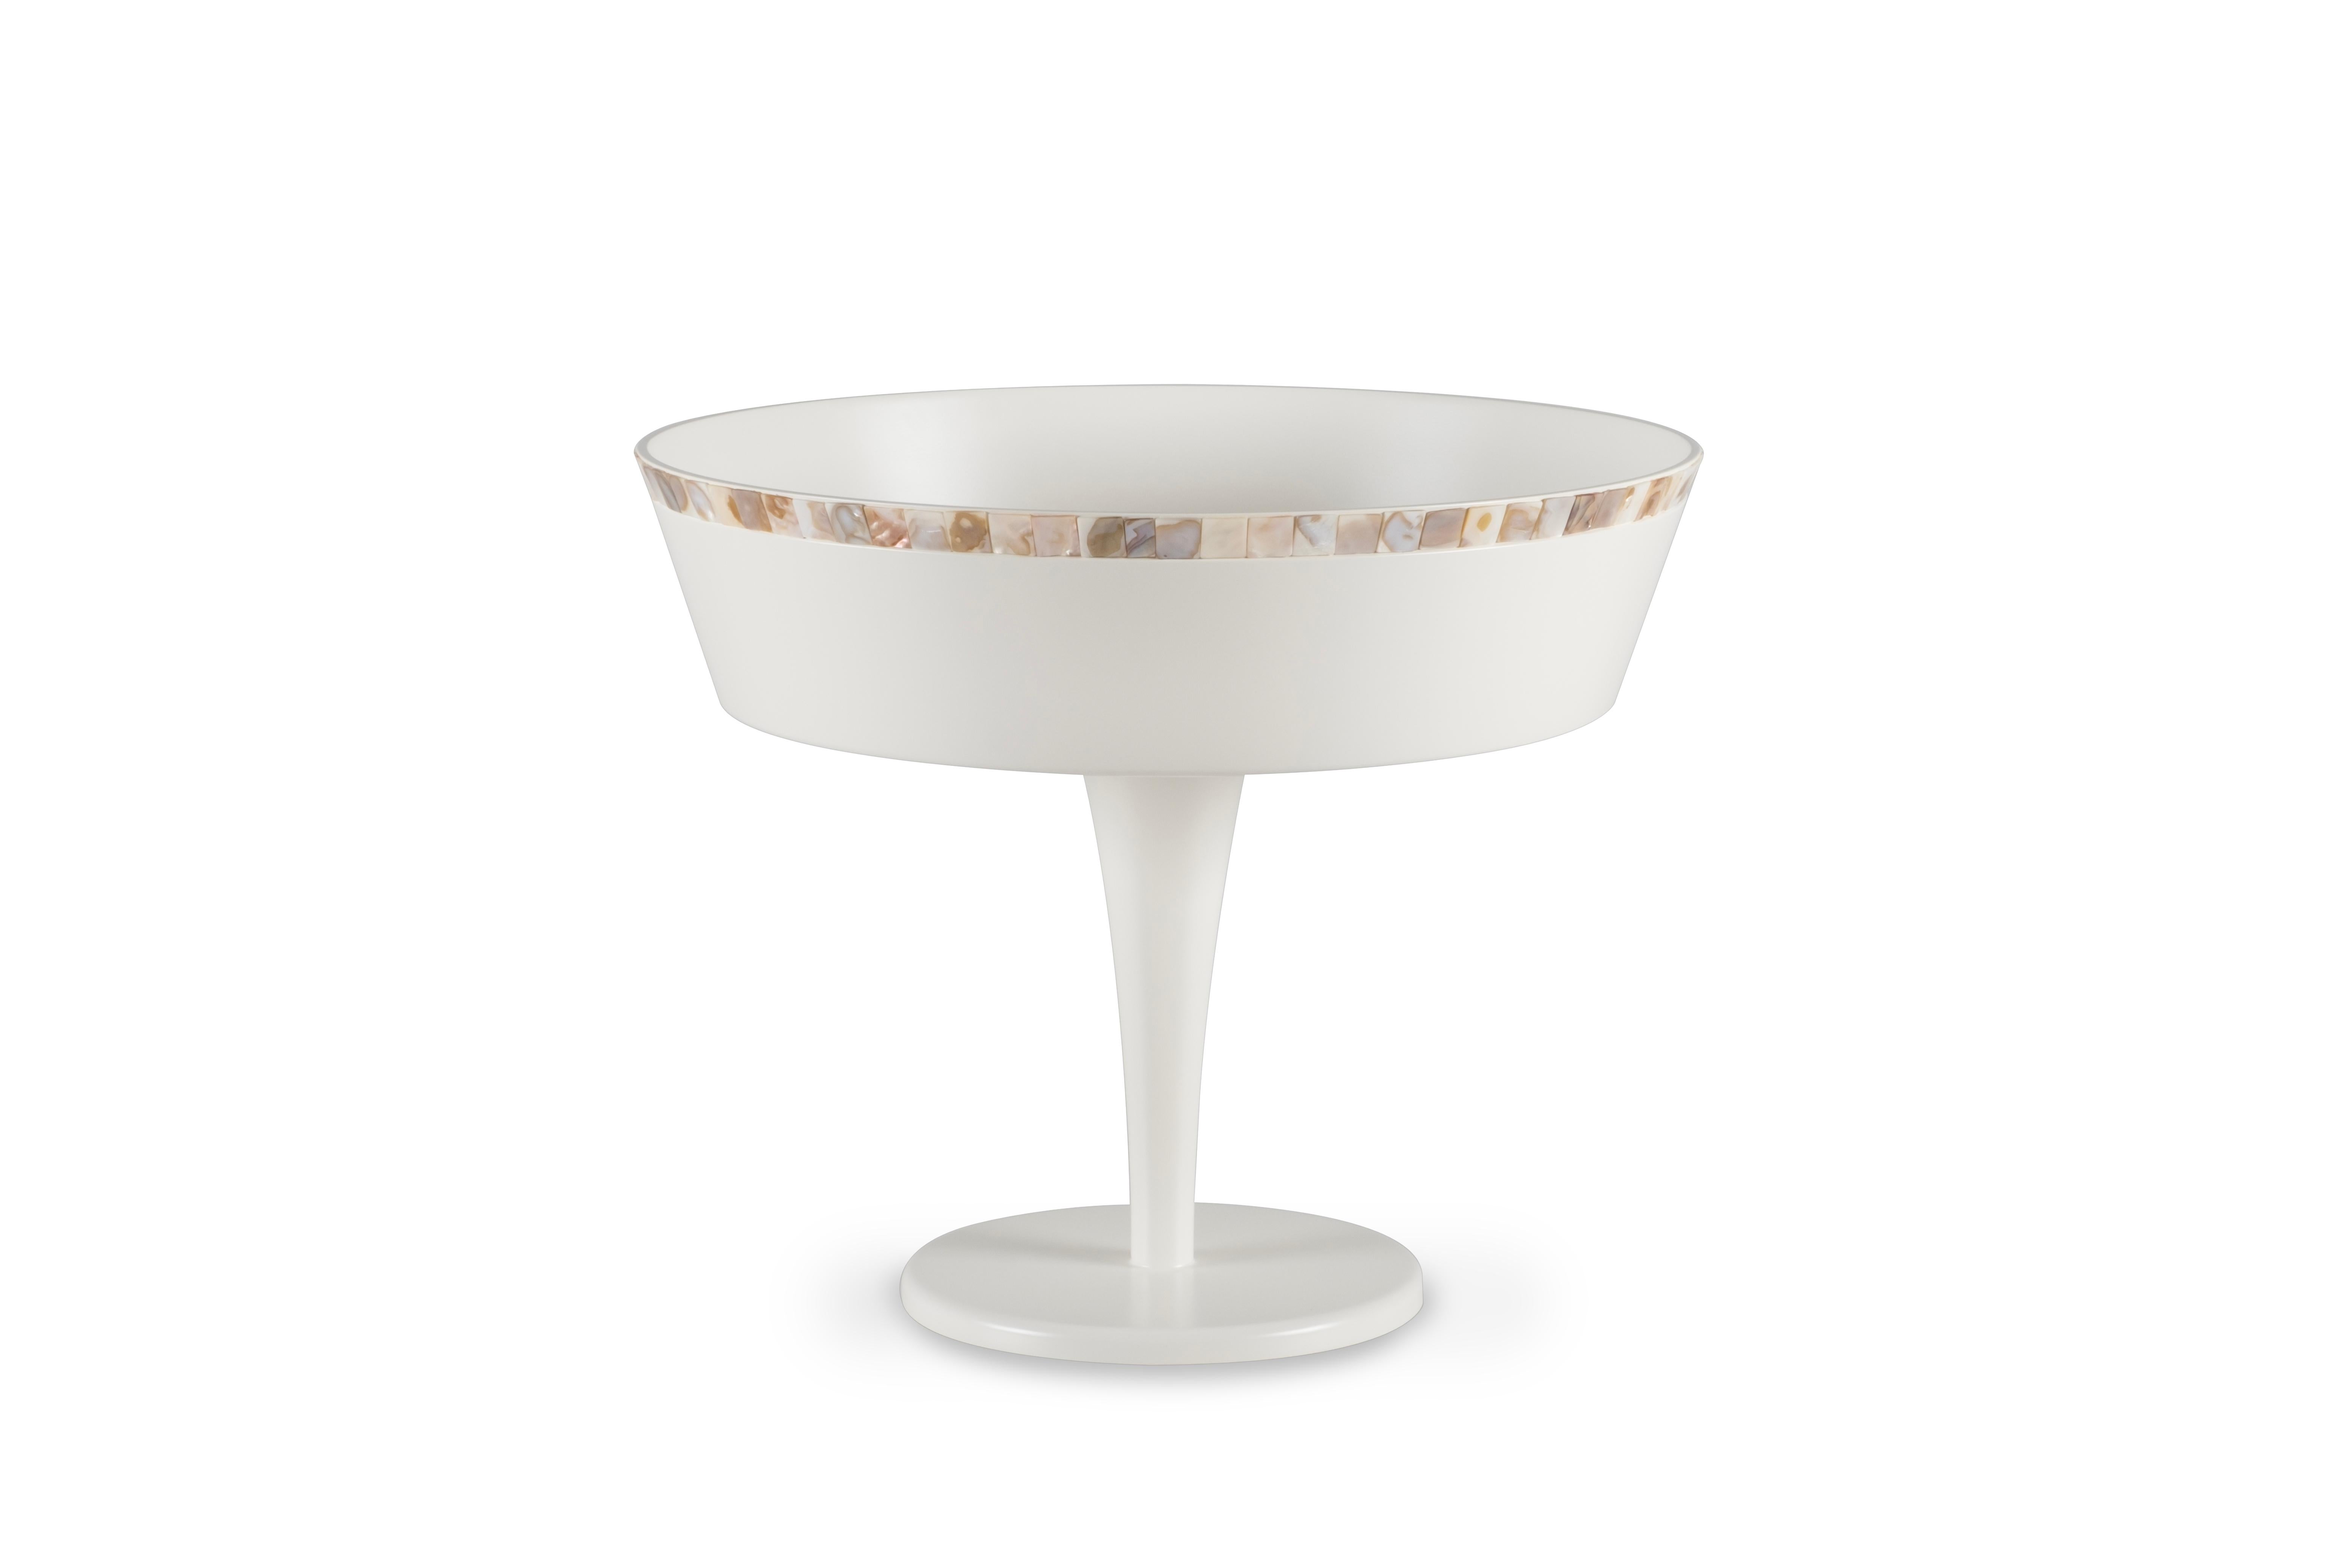 Wooden Decorative Bowl White Mosaic Tiles, Lusitanus Home Collection, Handcrafted in Portugal - Europe by Lusitanus Home.

This beautiful Decorative Bowl is lacquered in white cotton lacquer and has details in nacre mosaic applied by hand.

Not